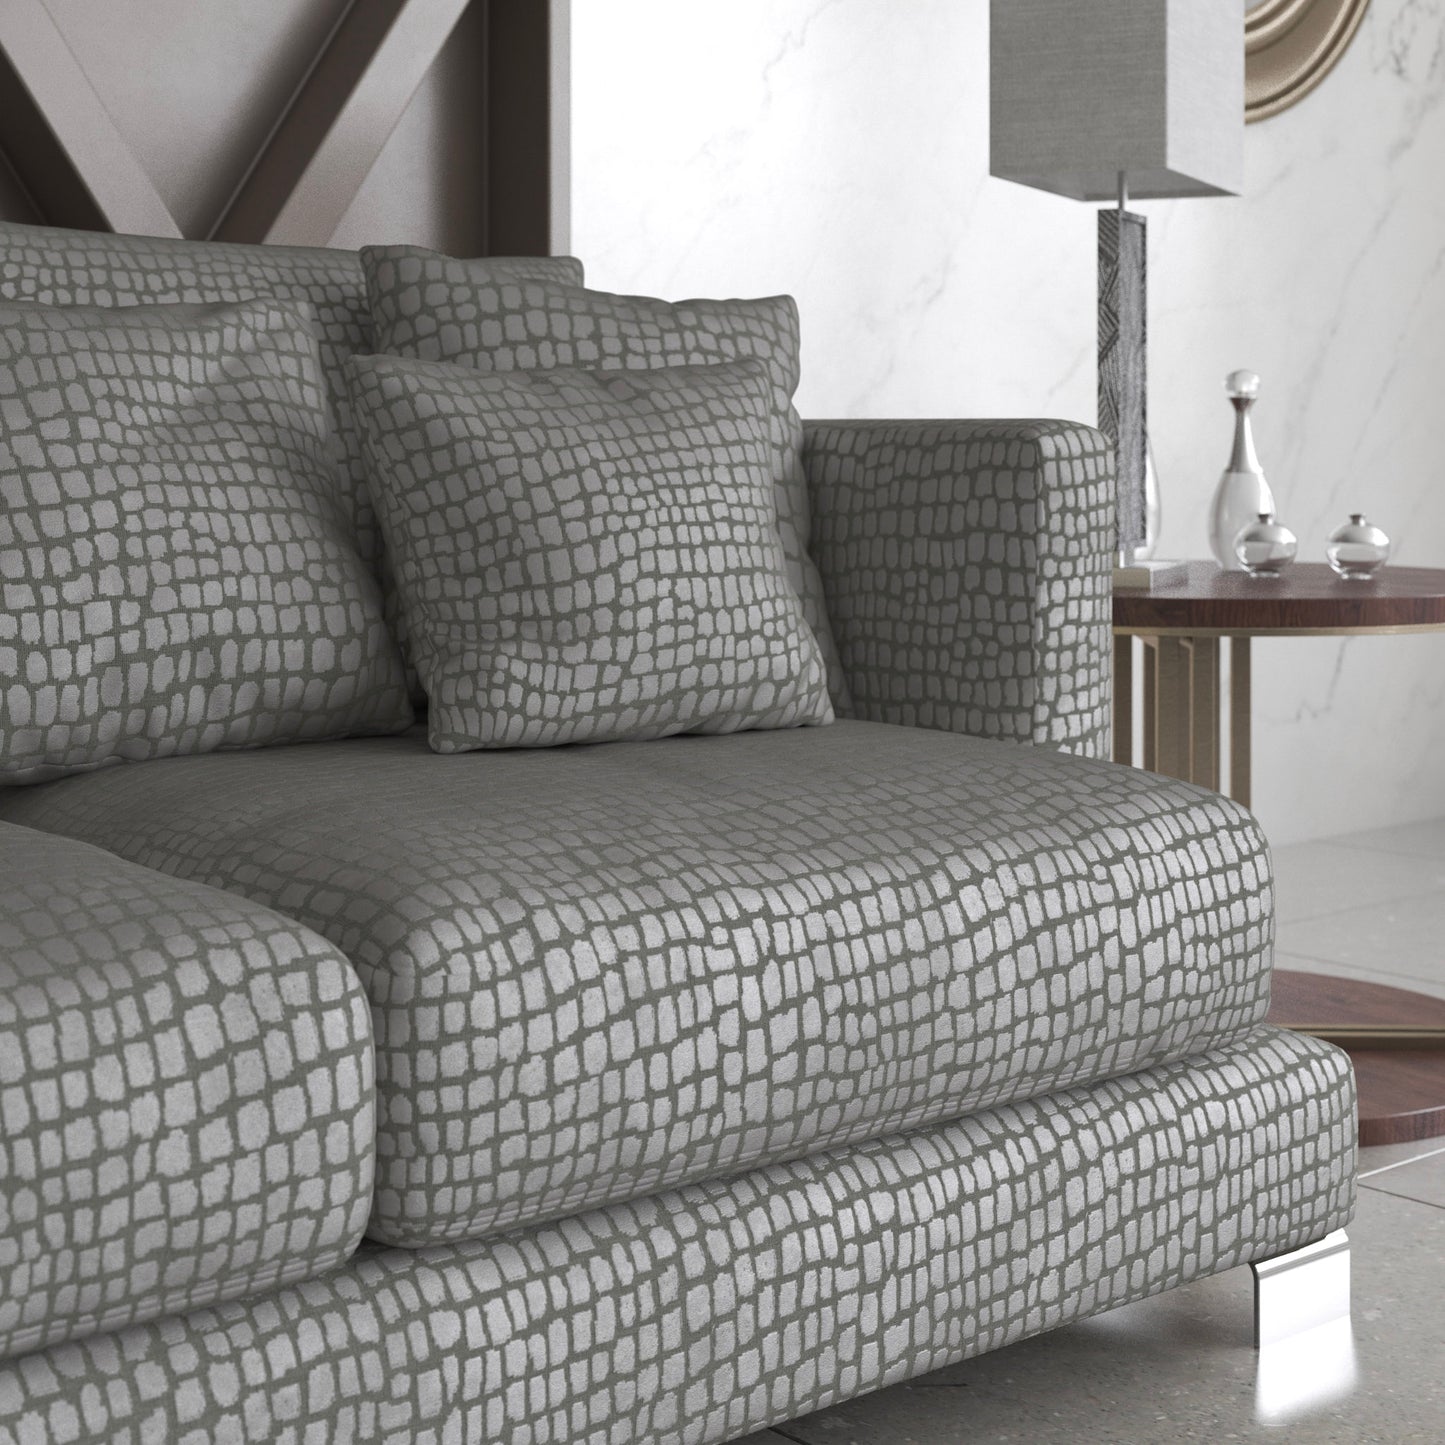 Cazador fabric part of the Sauvage collection shown on a sofa